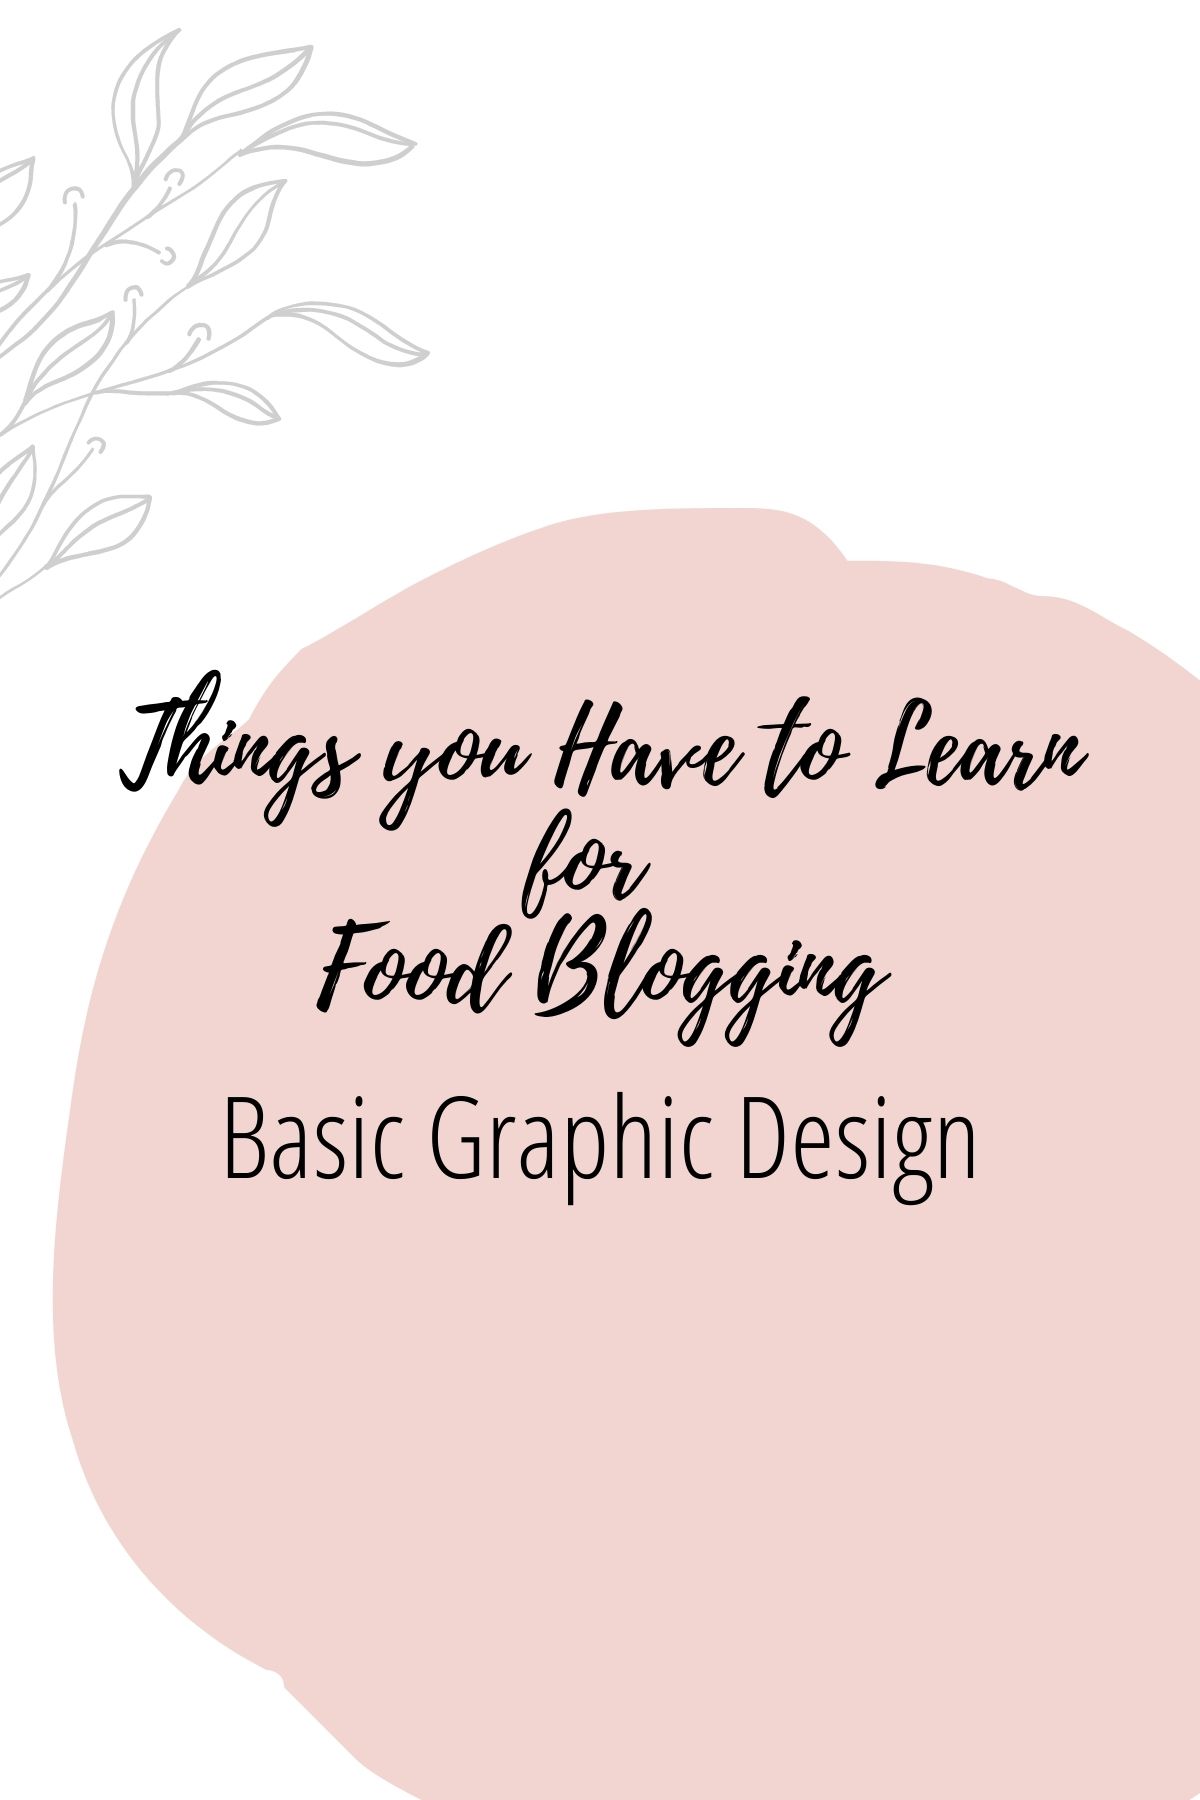 Graphic reading - Thing you Have to Learn for Food Blogging: Basic Graphic Design